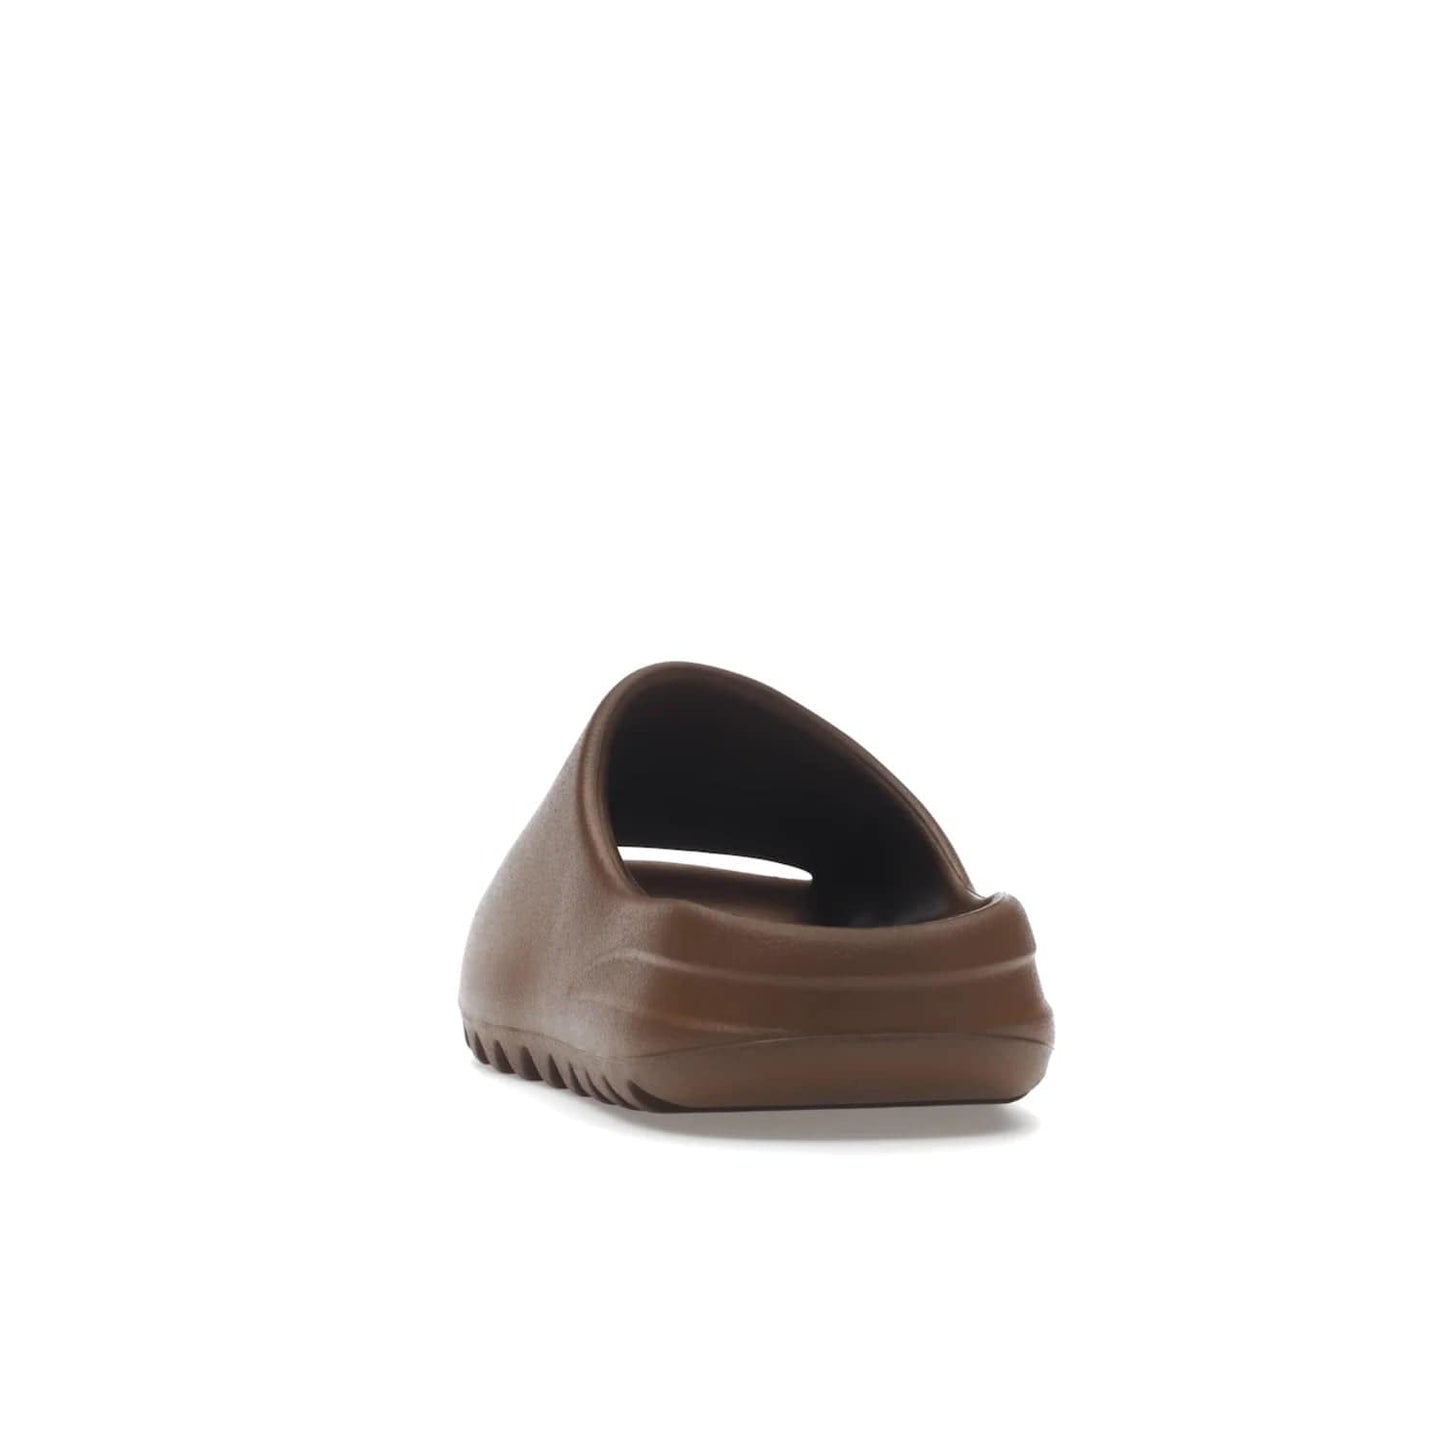 adidas Yeezy Slide Flax - Image 27 - Only at www.BallersClubKickz.com - Score the perfect casual look with the adidas Yeezy Slide Flax. Made with lightweight injected EVA plus horizontal grooves underfoot for traction. Release on August 22, 2022. $70.